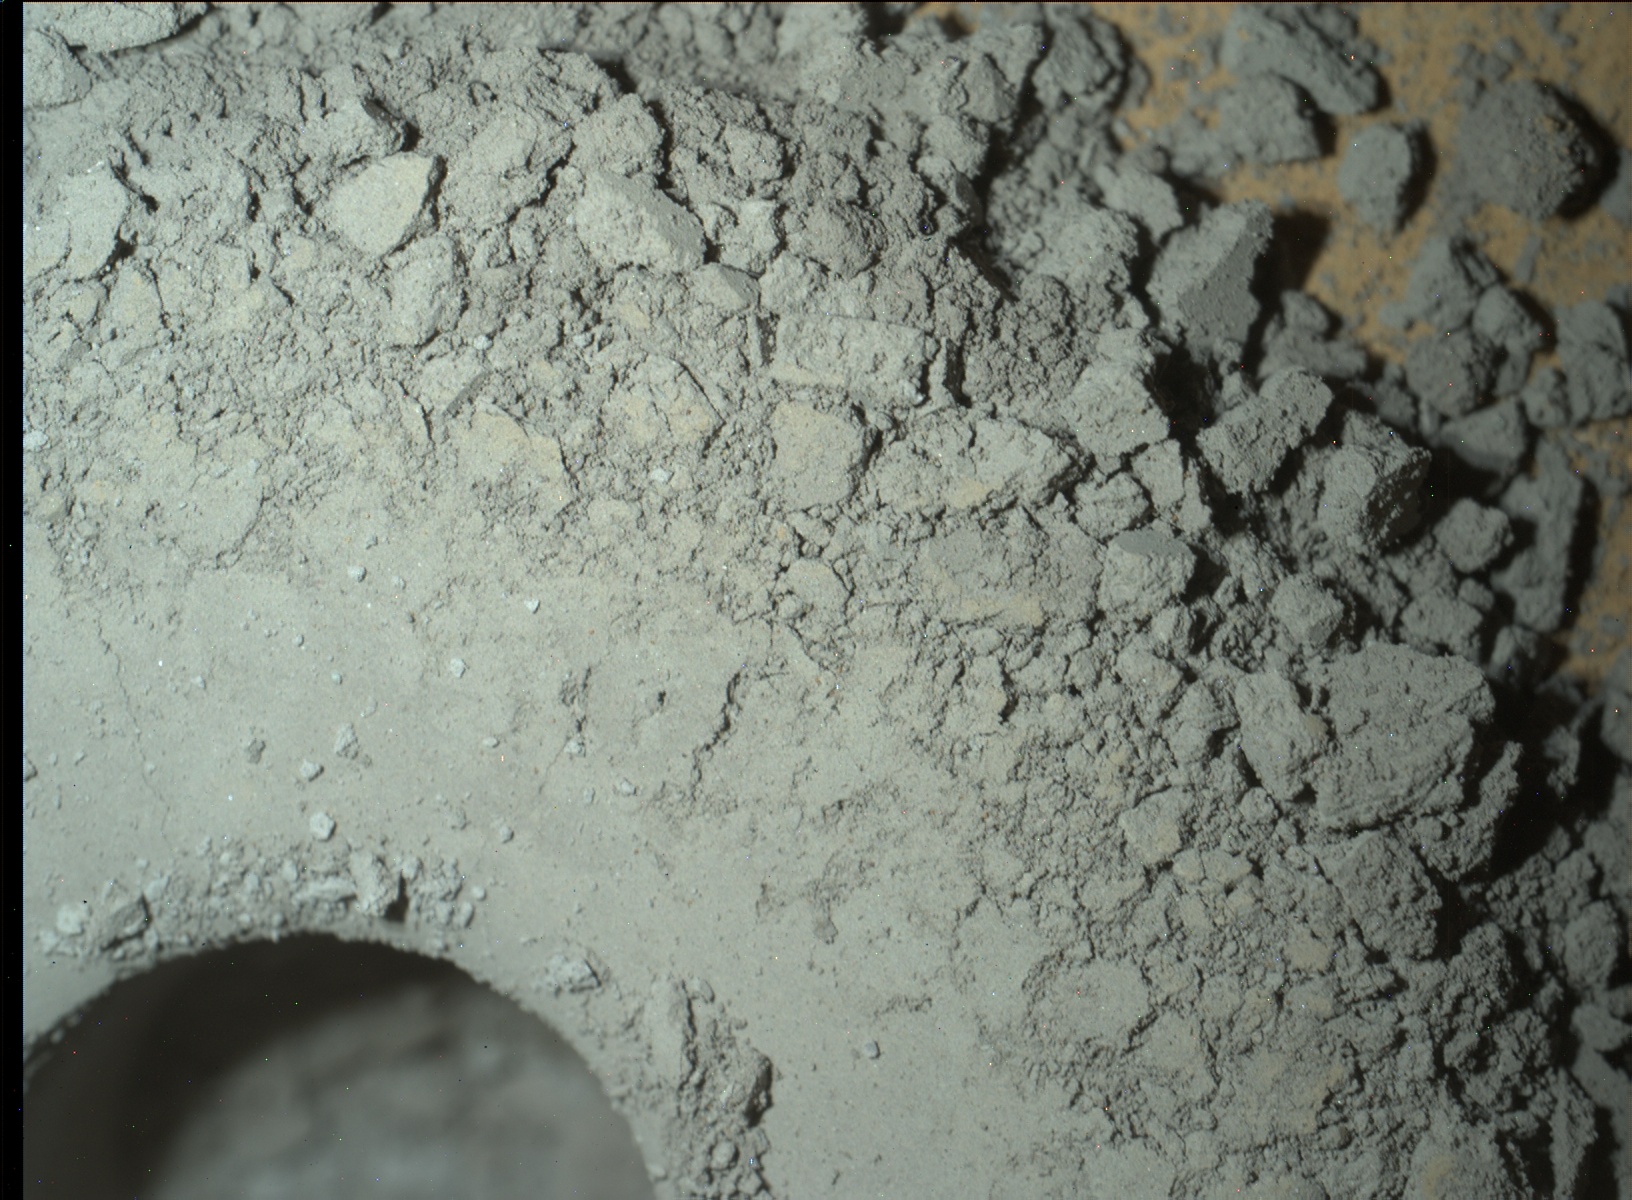 Nasa's Mars rover Curiosity acquired this image using its Mars Hand Lens Imager (MAHLI) on Sol 1364